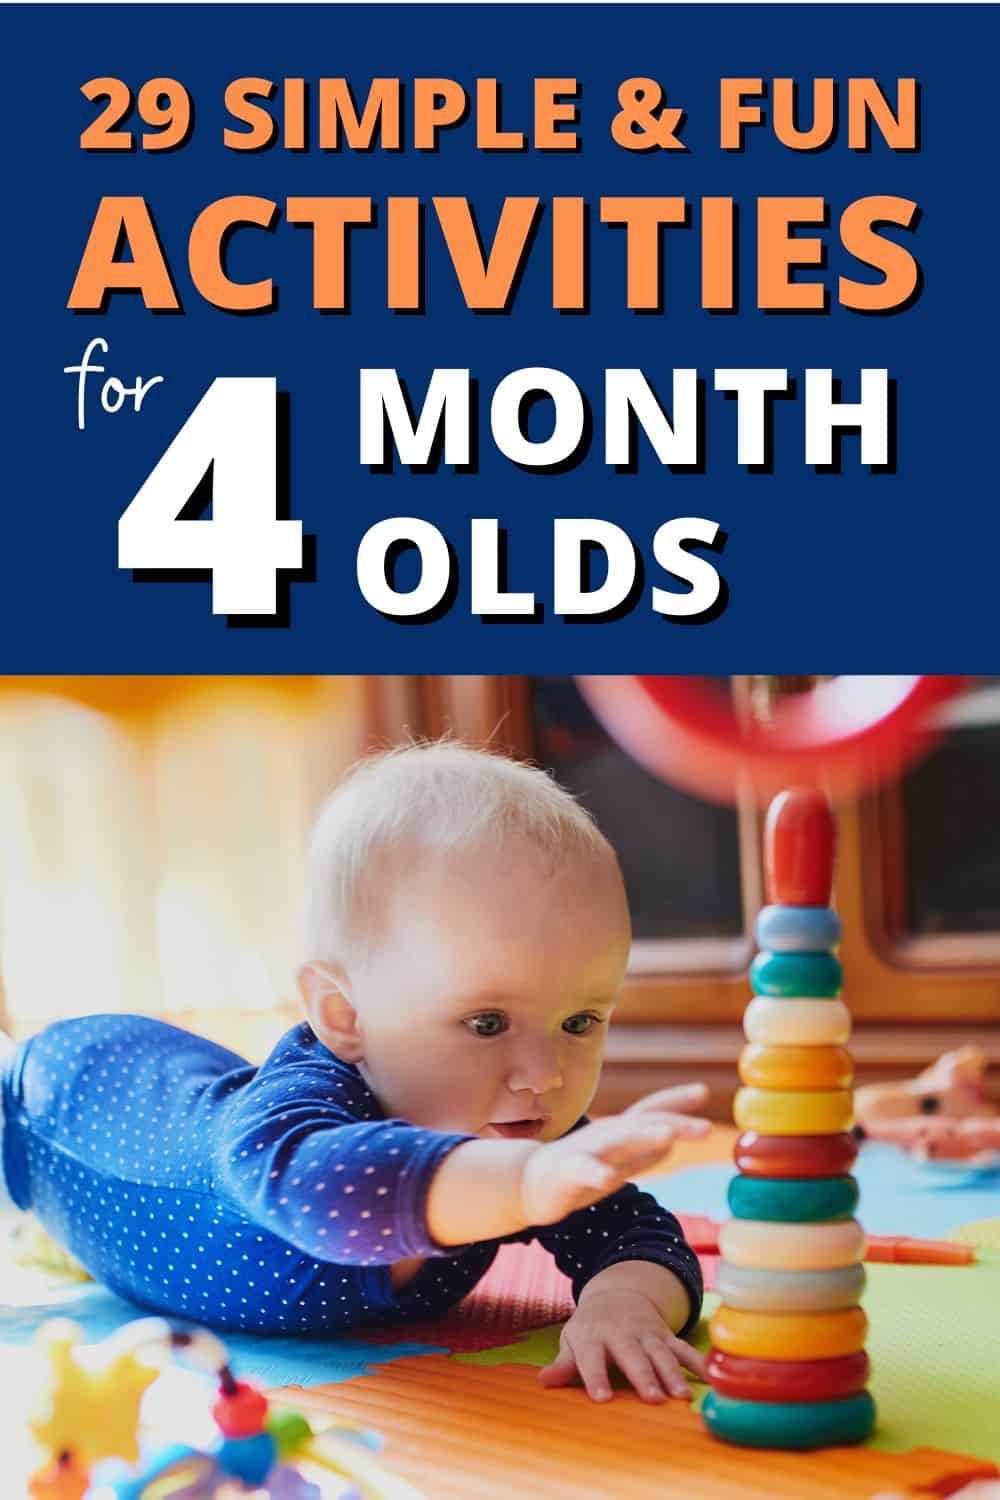 feature image for activities for 4 month old baby post